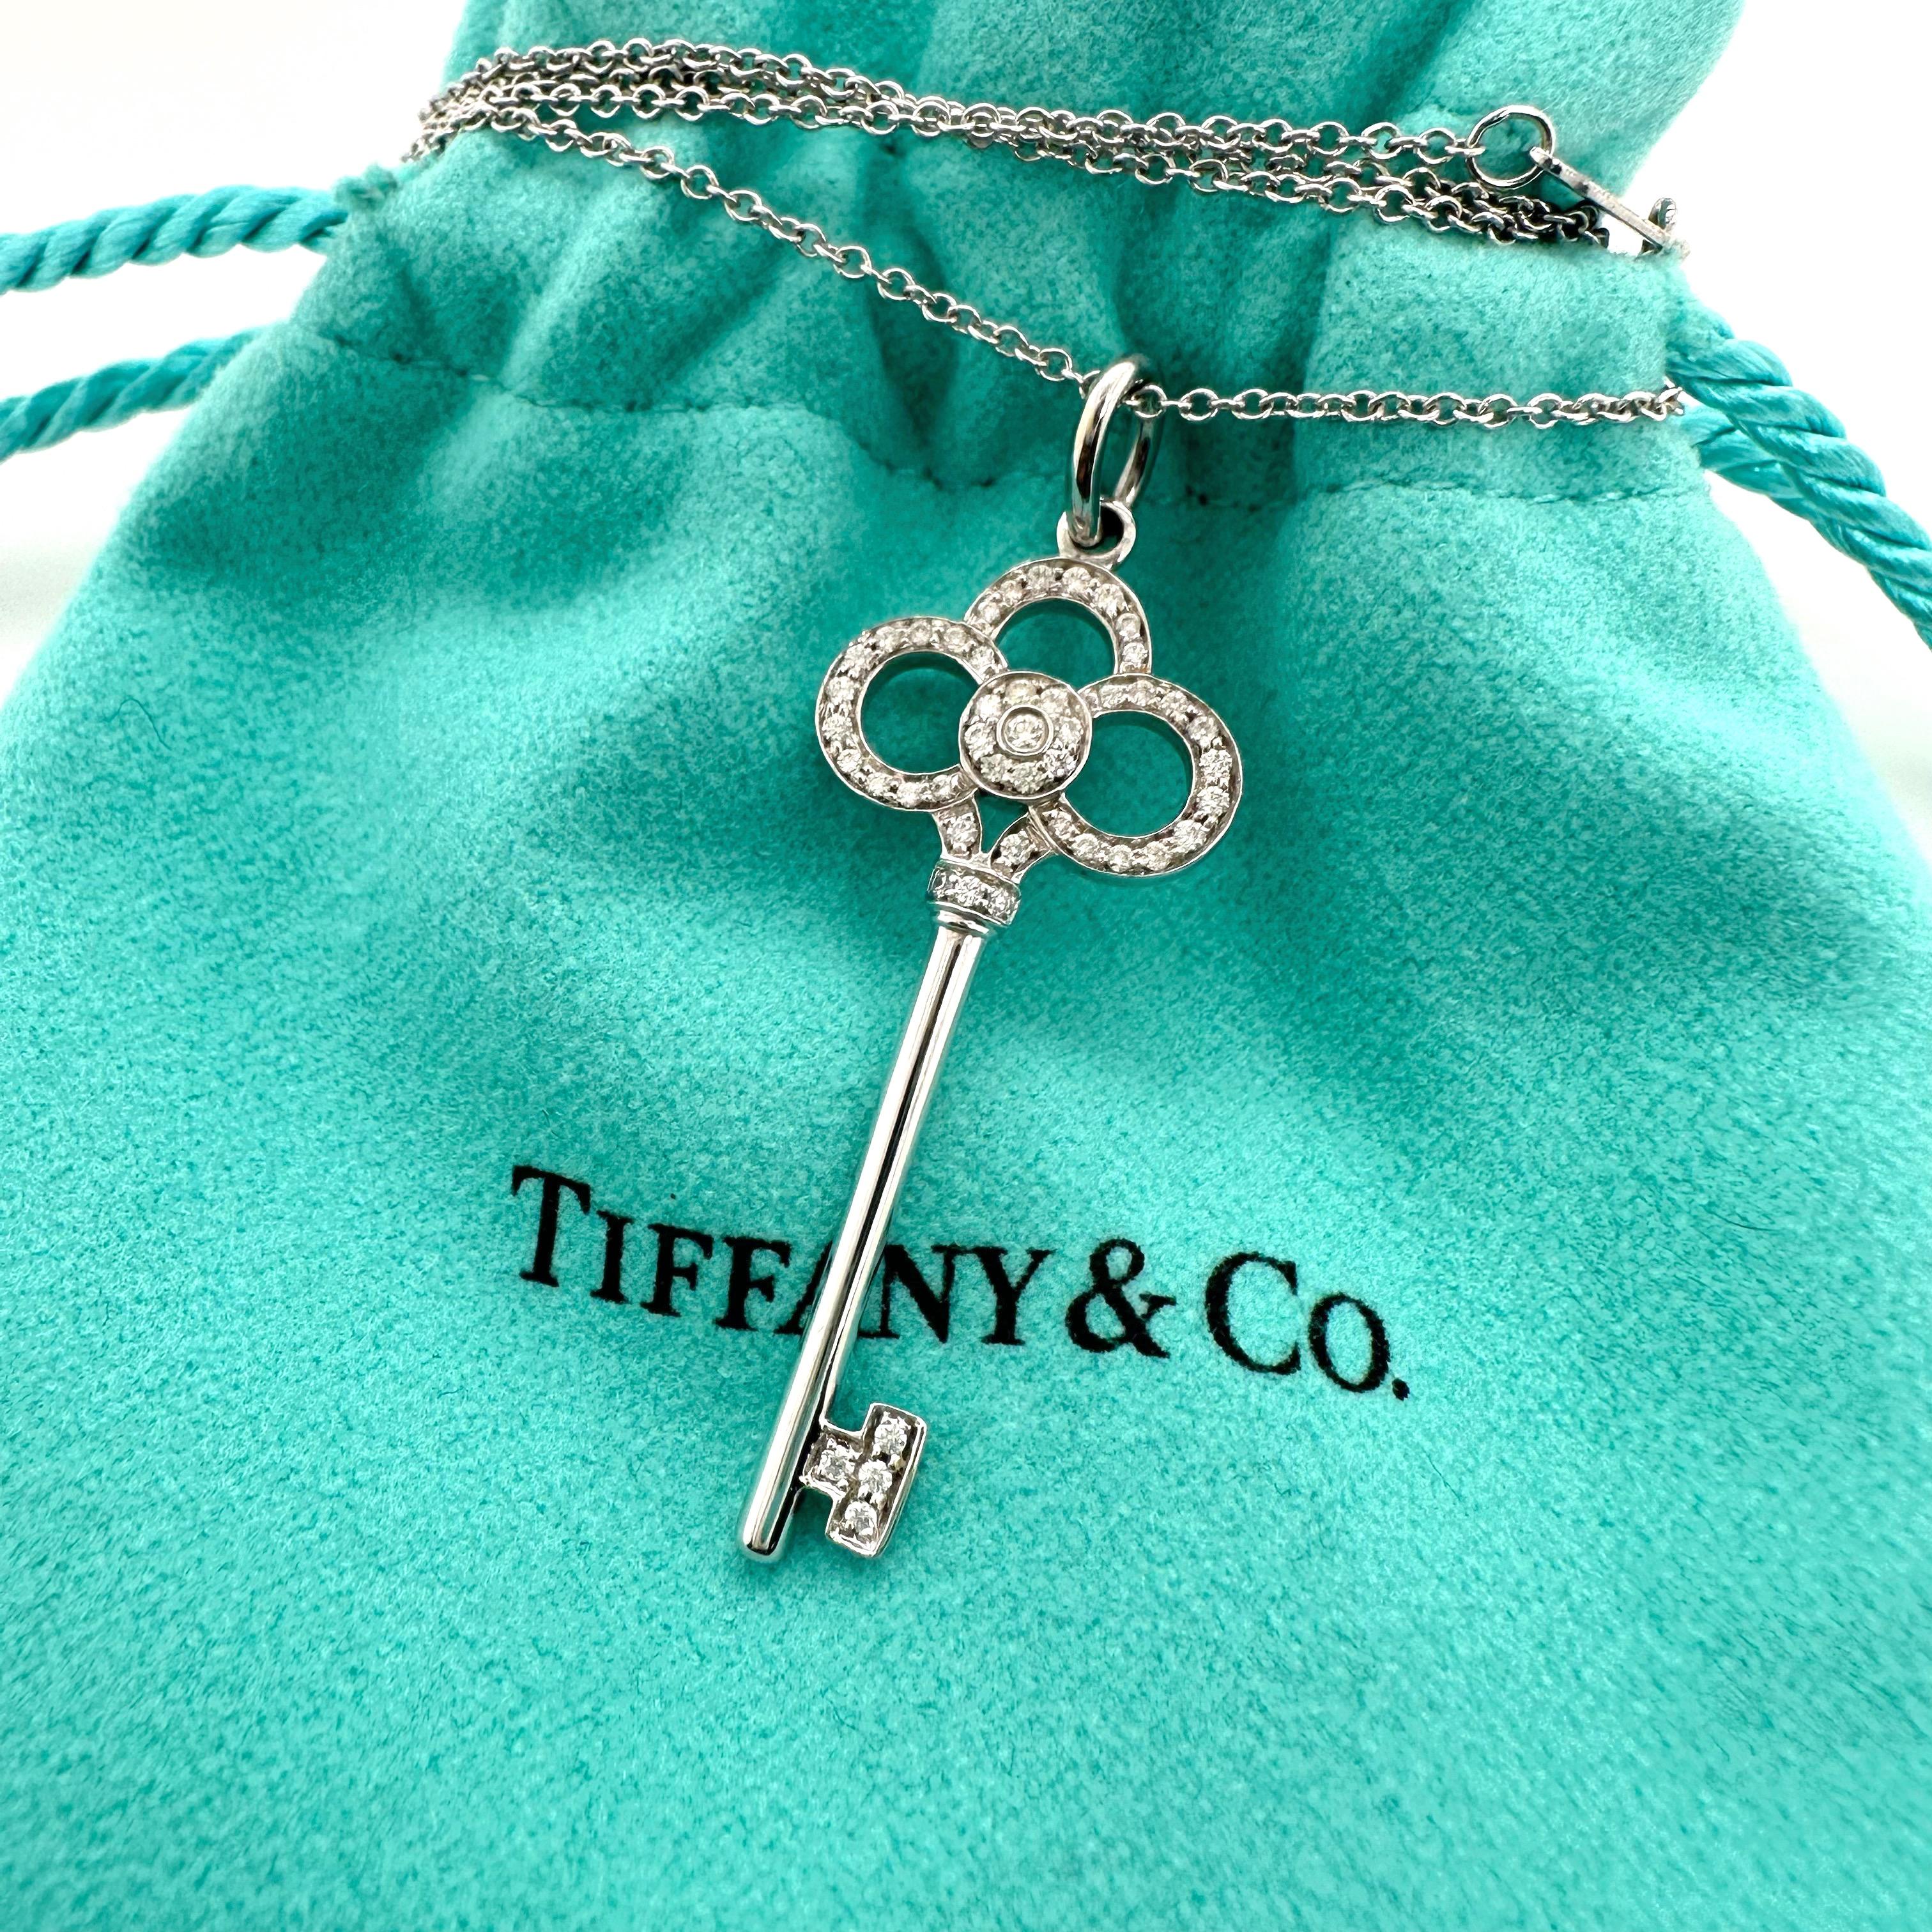 Tiffany & Co. Crown Key Diamond Pendant Necklace 18kt White Gold For Sale 2